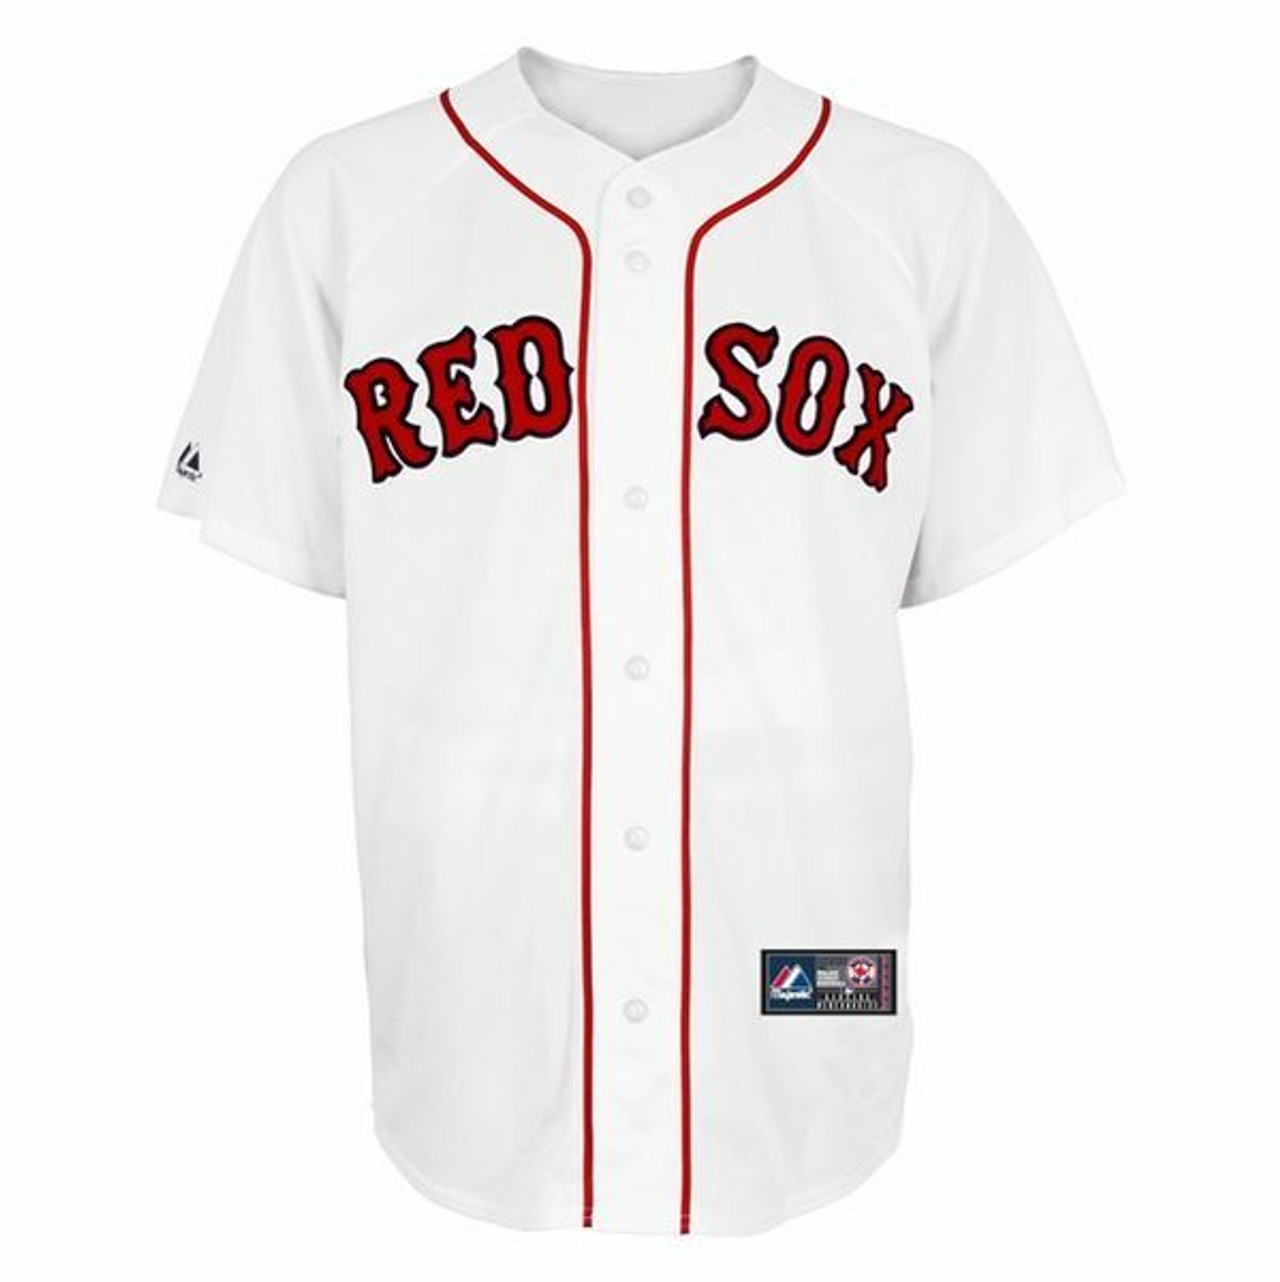 Ladies Boston Red Sox Jerseys, Red Sox Jersey, Boston Red Sox Uniforms